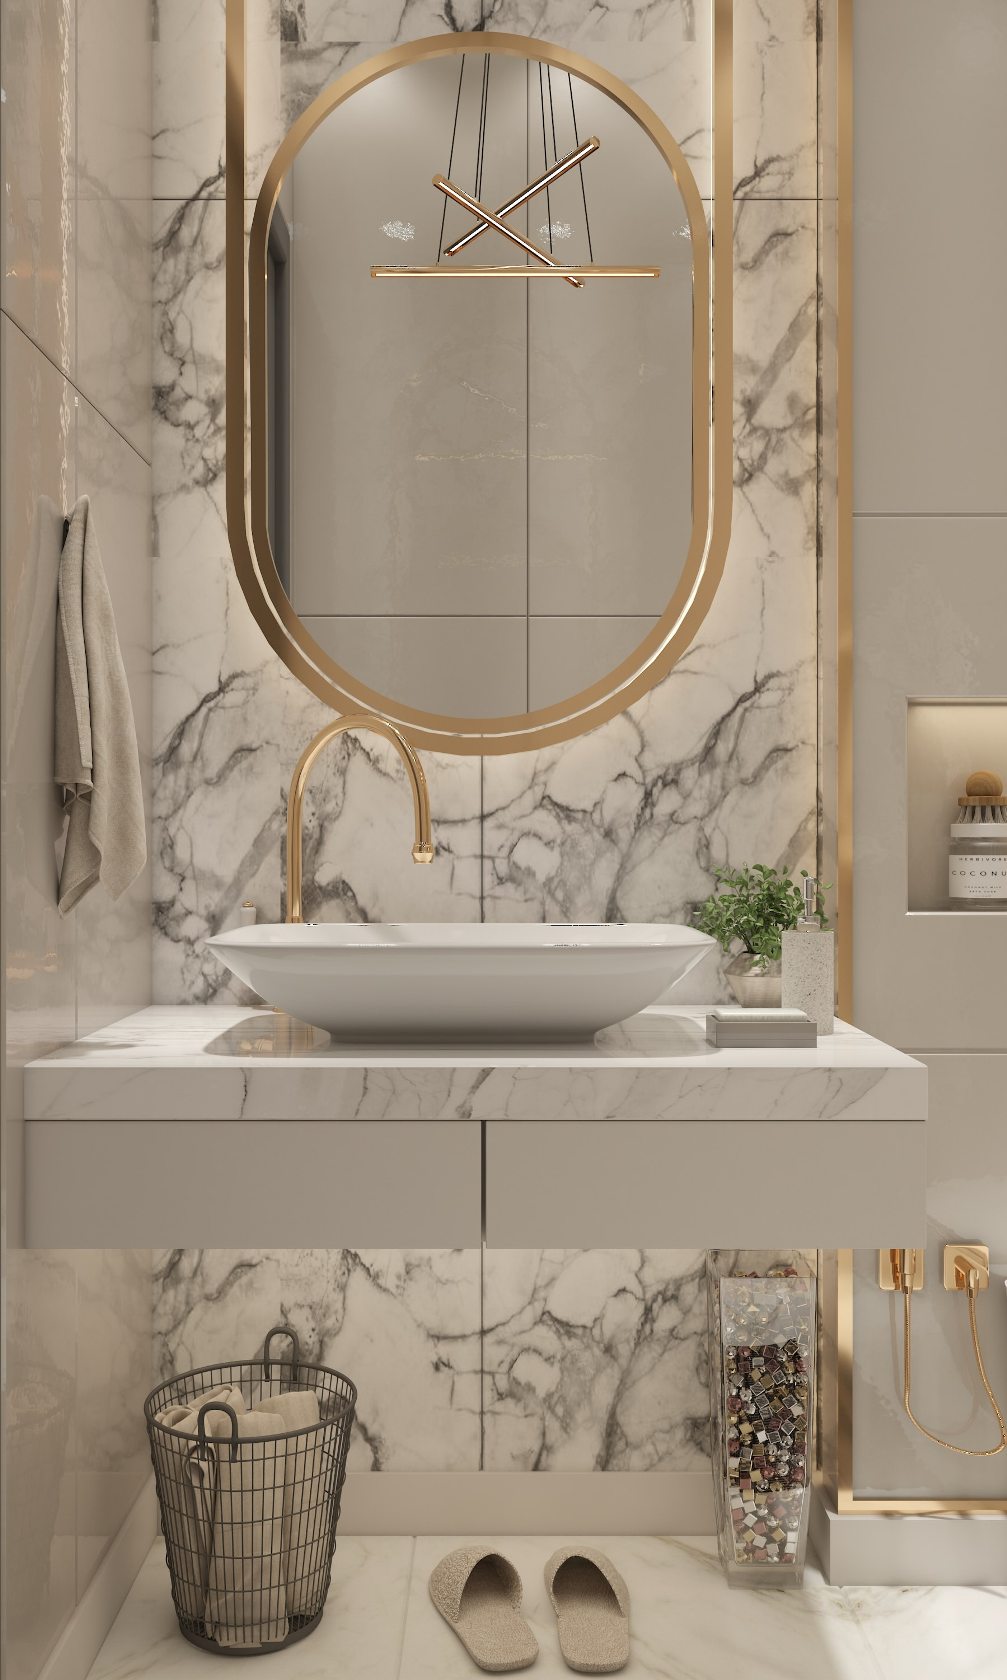 How to design a stylish but functional bathroom